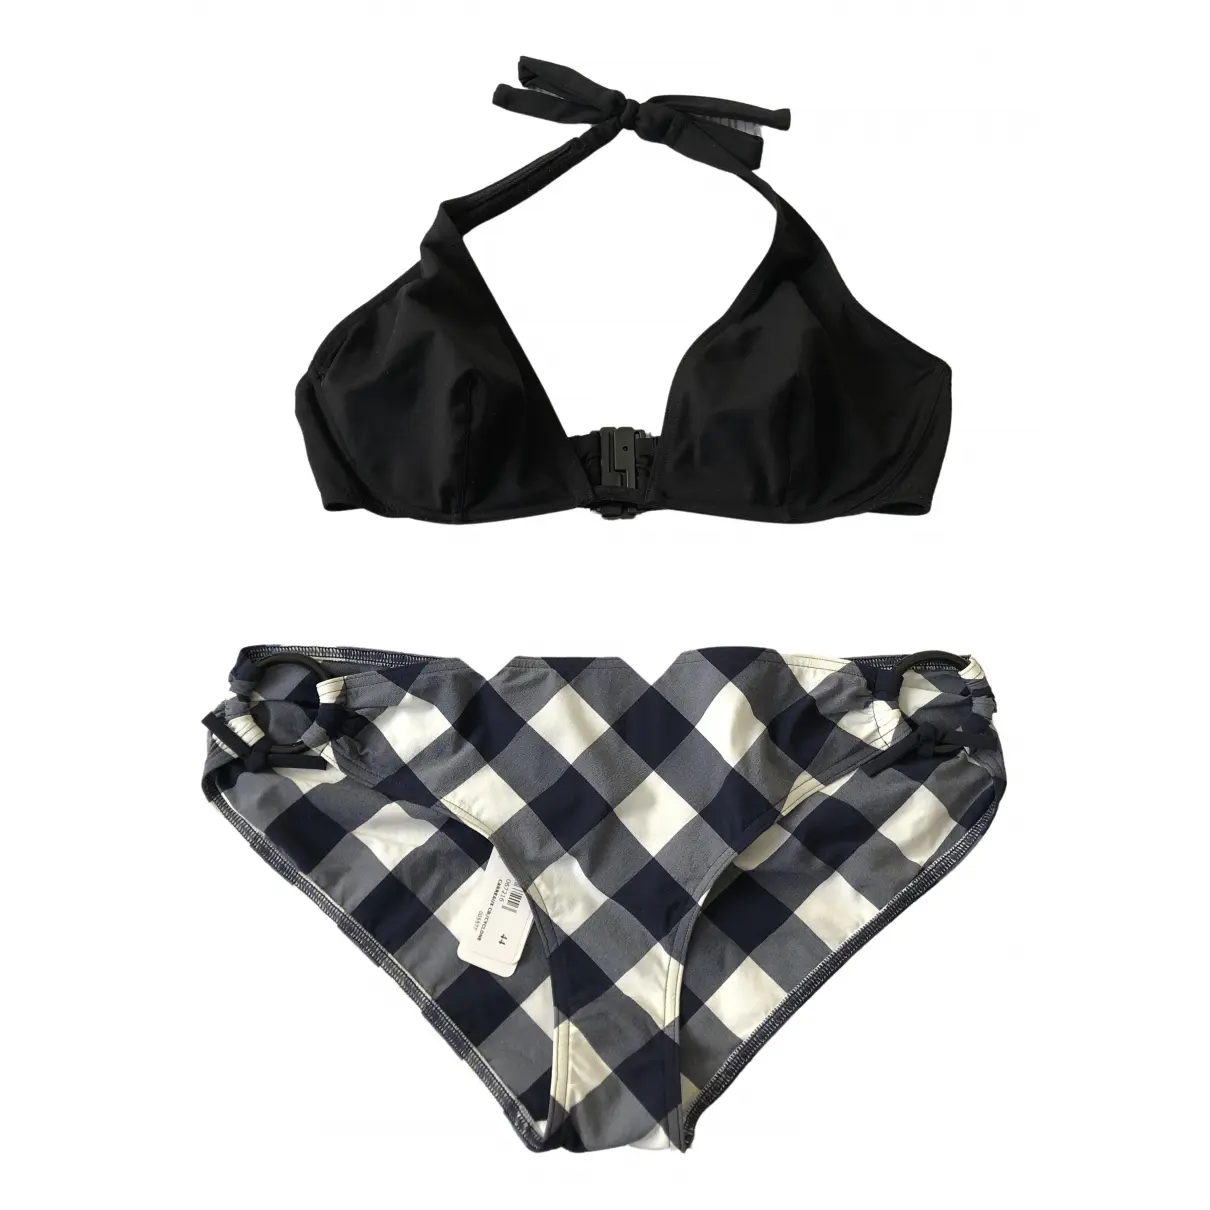 Two-piece swimsuit Eres